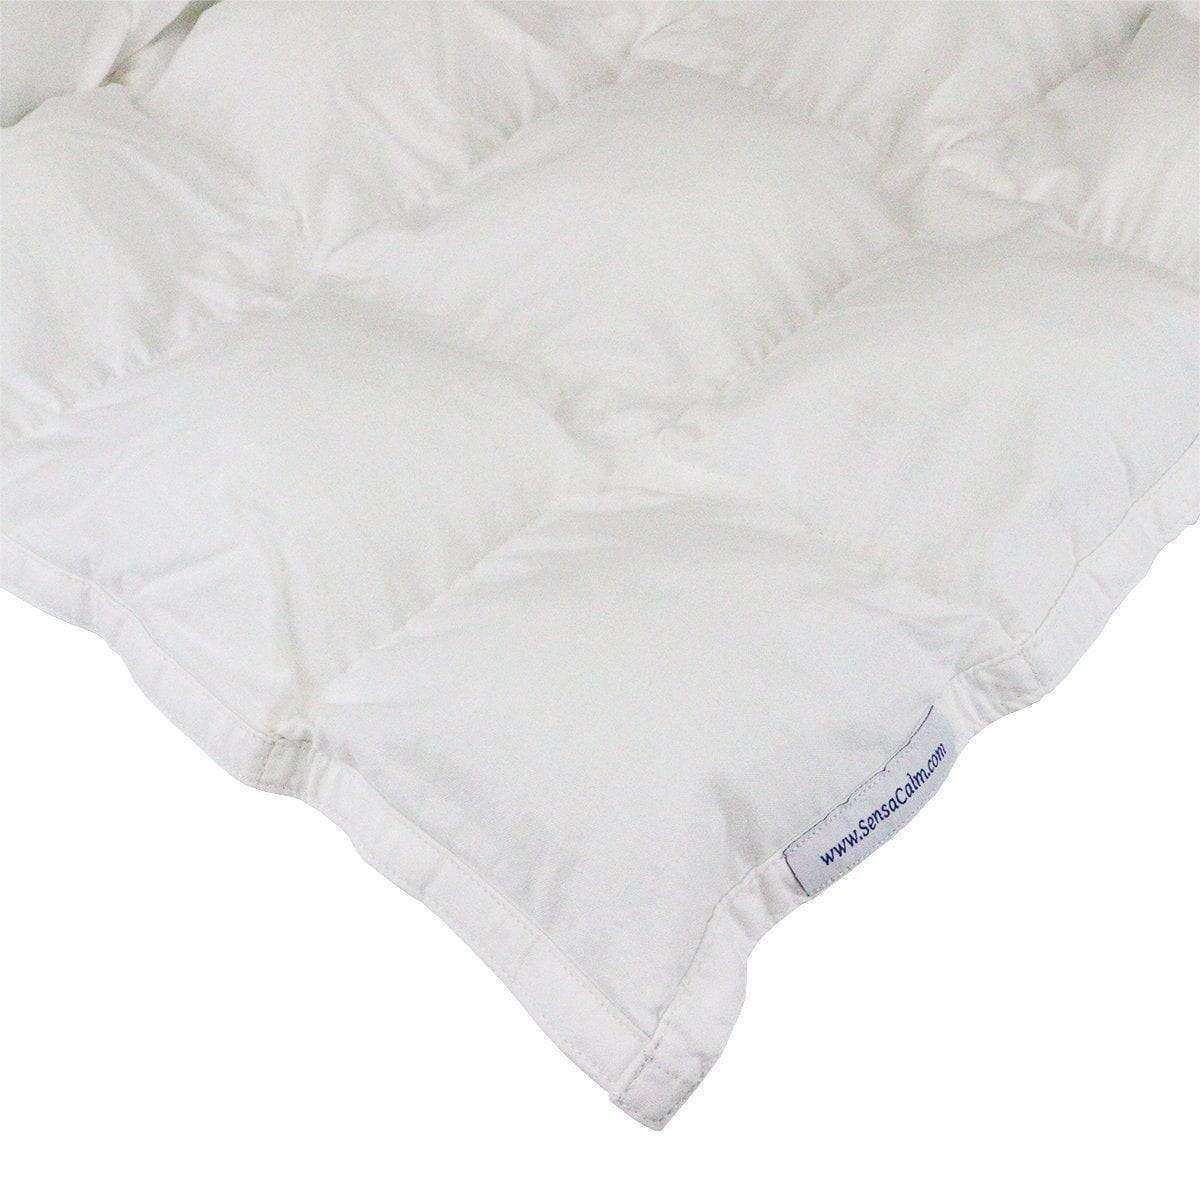 Clearance Weighted Blanket - Queen 15 lb White w/ Snaps (70-80 lb user)